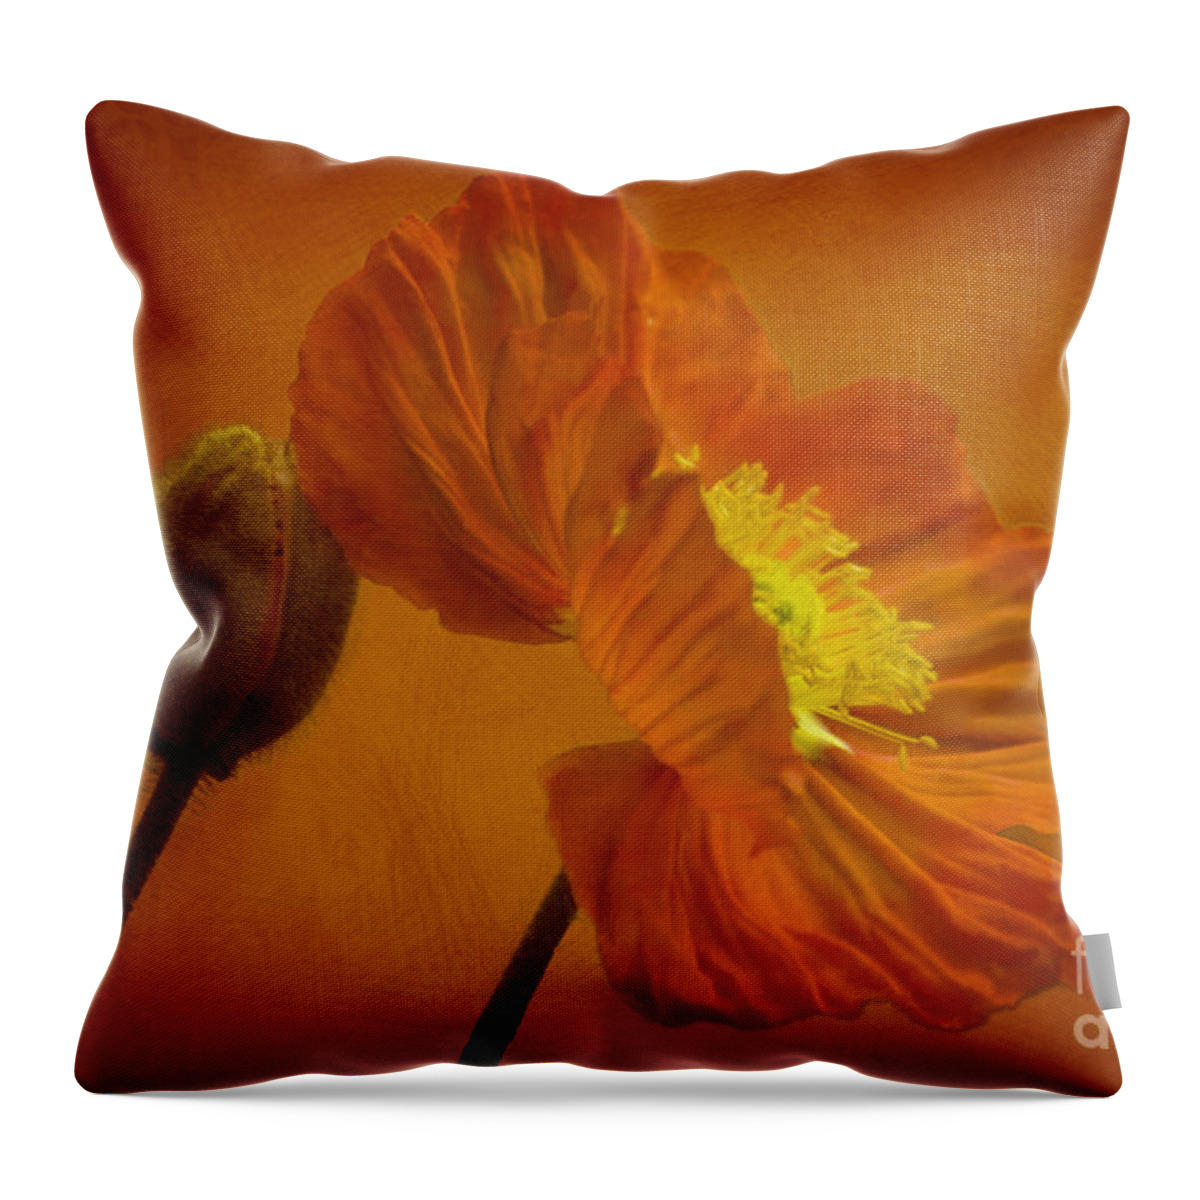 Orange Throw Pillow featuring the photograph Flaming Beauty by Heiko Koehrer-Wagner